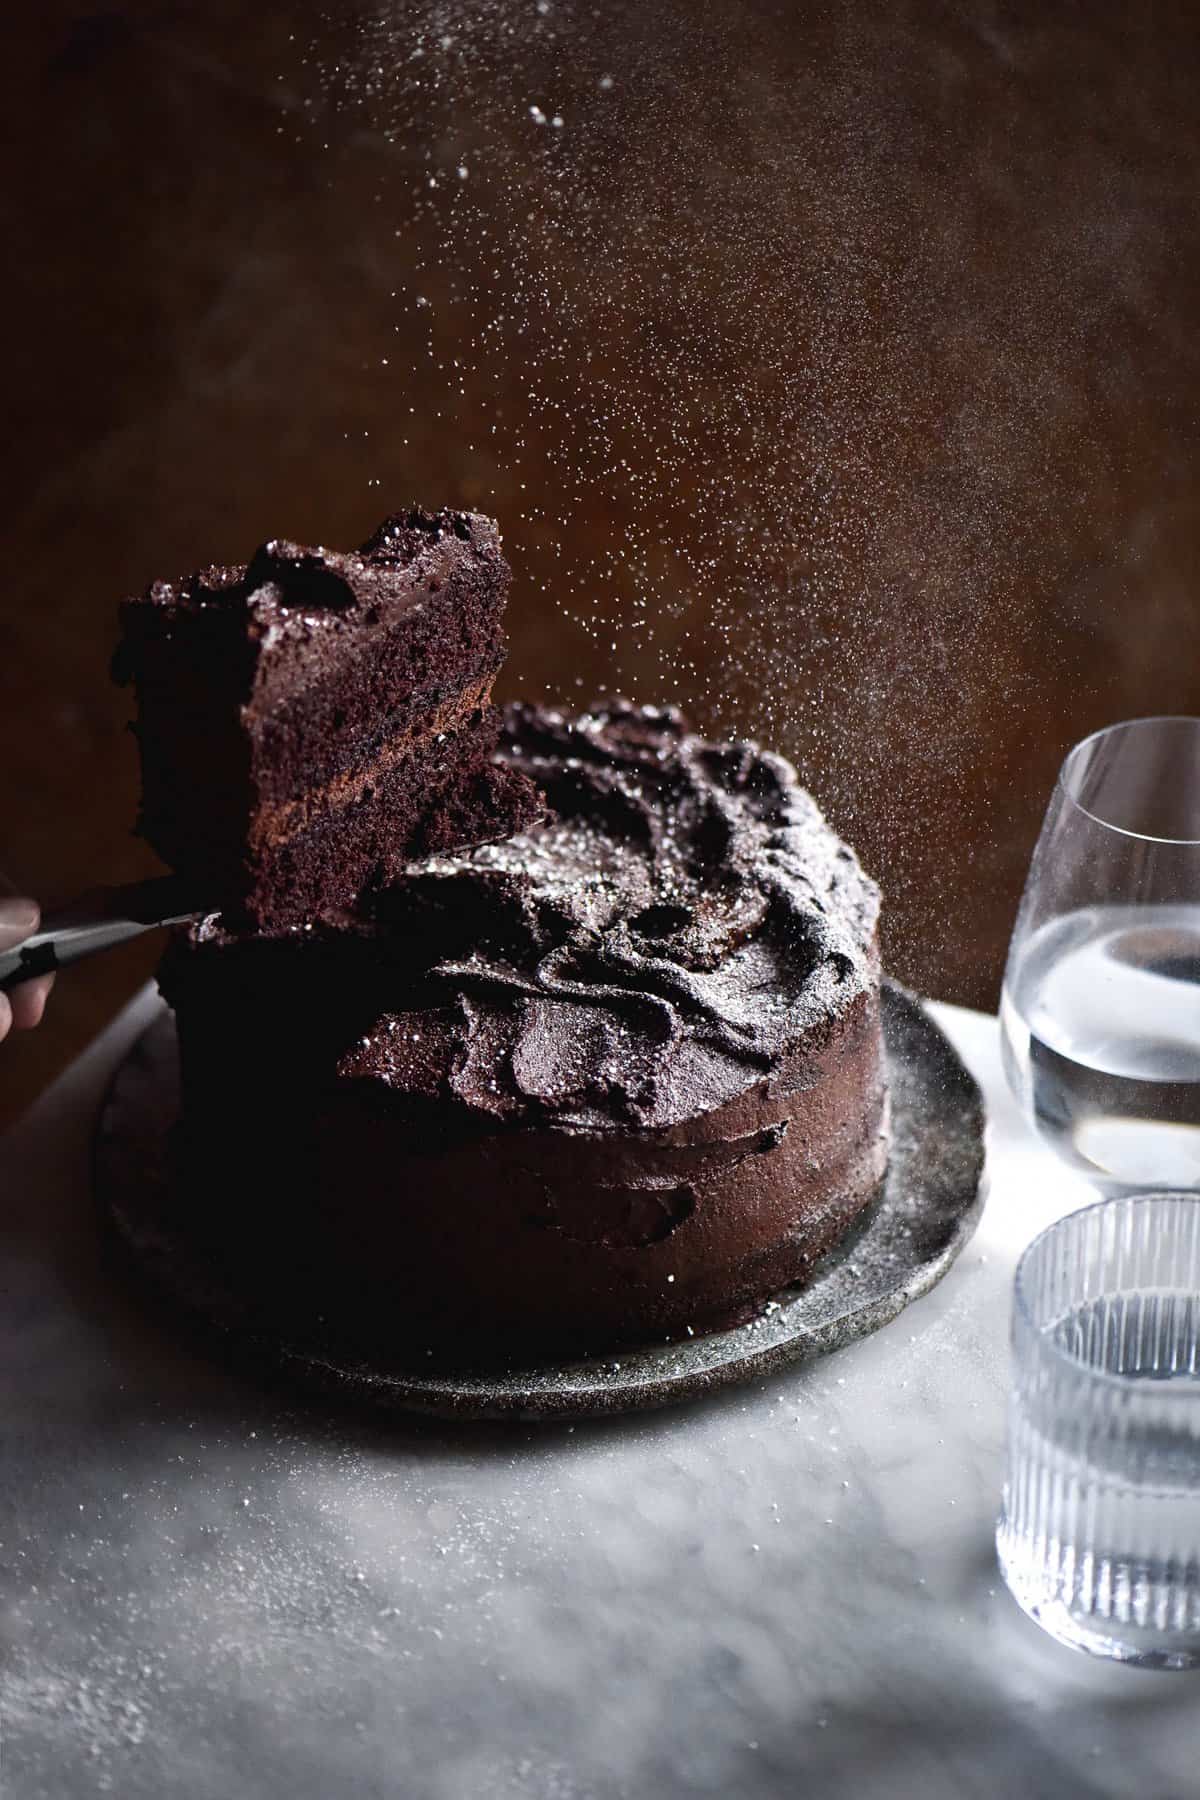 A gluten free chocolate cake sits atop a white marble table against a rusty brown backdrop. A slice of the cake has been removed and is held up by a hand from the left of the image. The whole cake is being sprinkled with snow-like icing sugar, and soft light filters through two water glasses to the right of the image